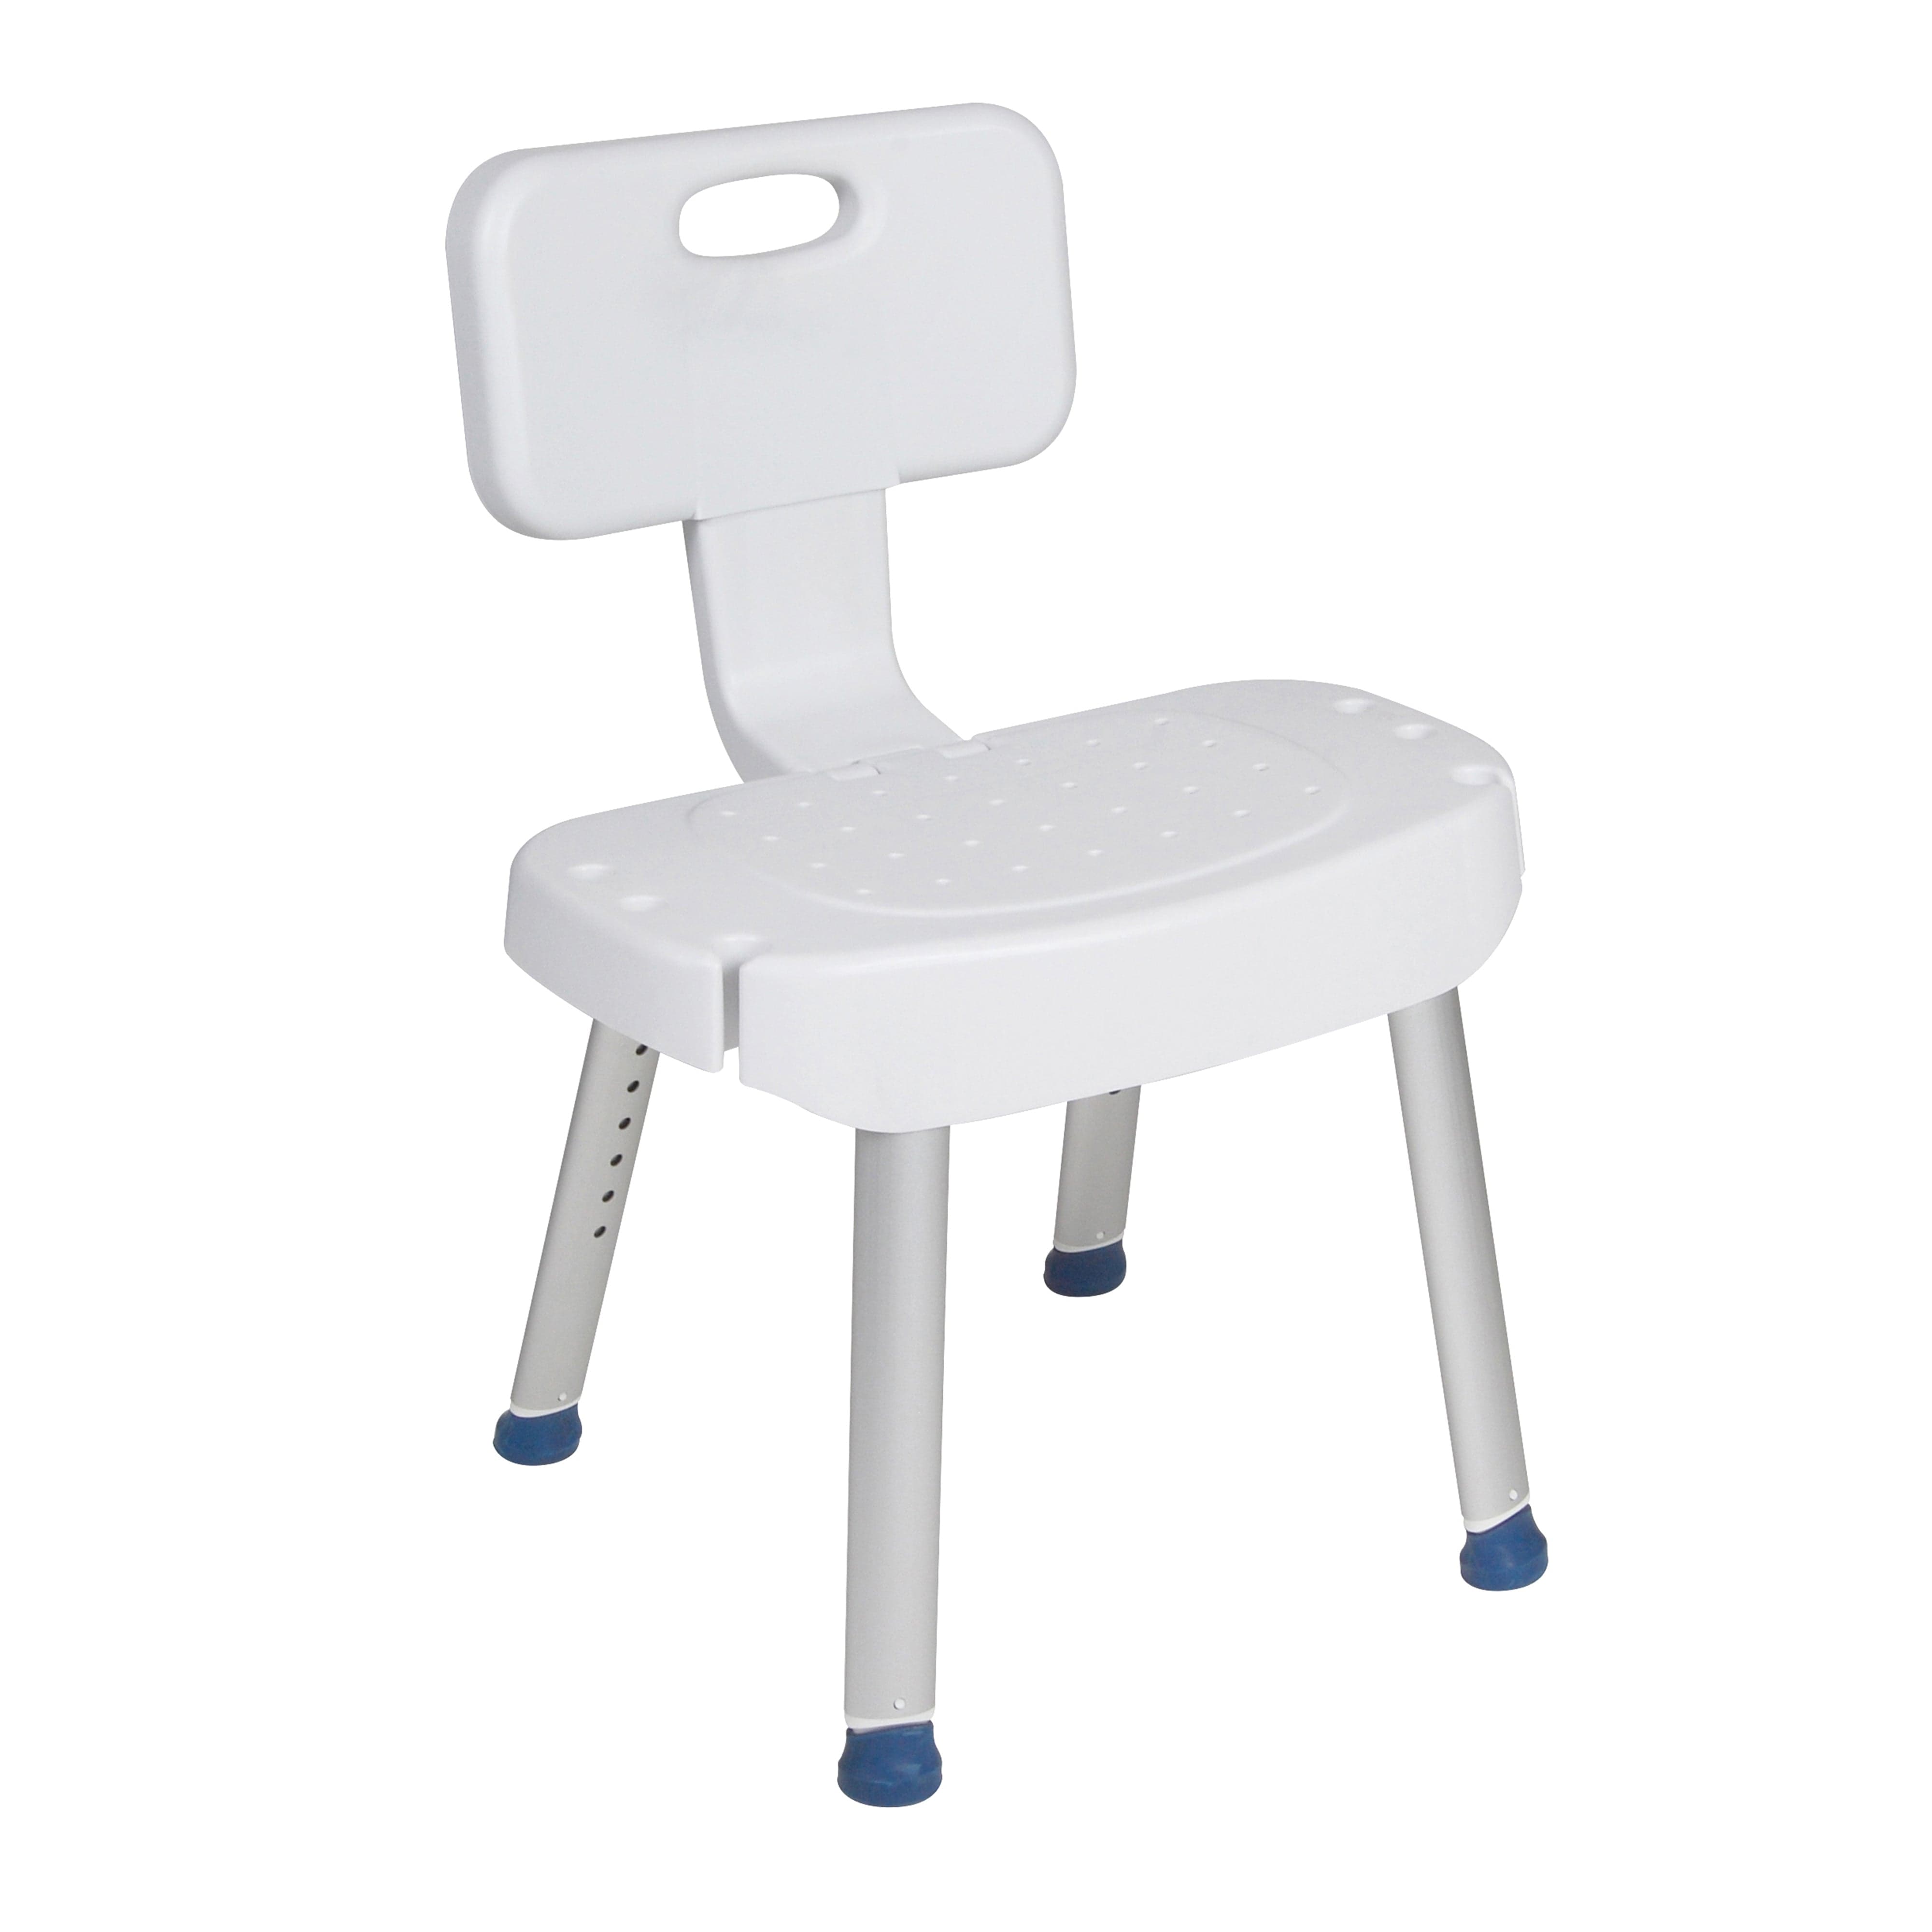 Drive Medical Bathroom Safety Drive Medical Bathroom Safety Shower Chair with Folding Back